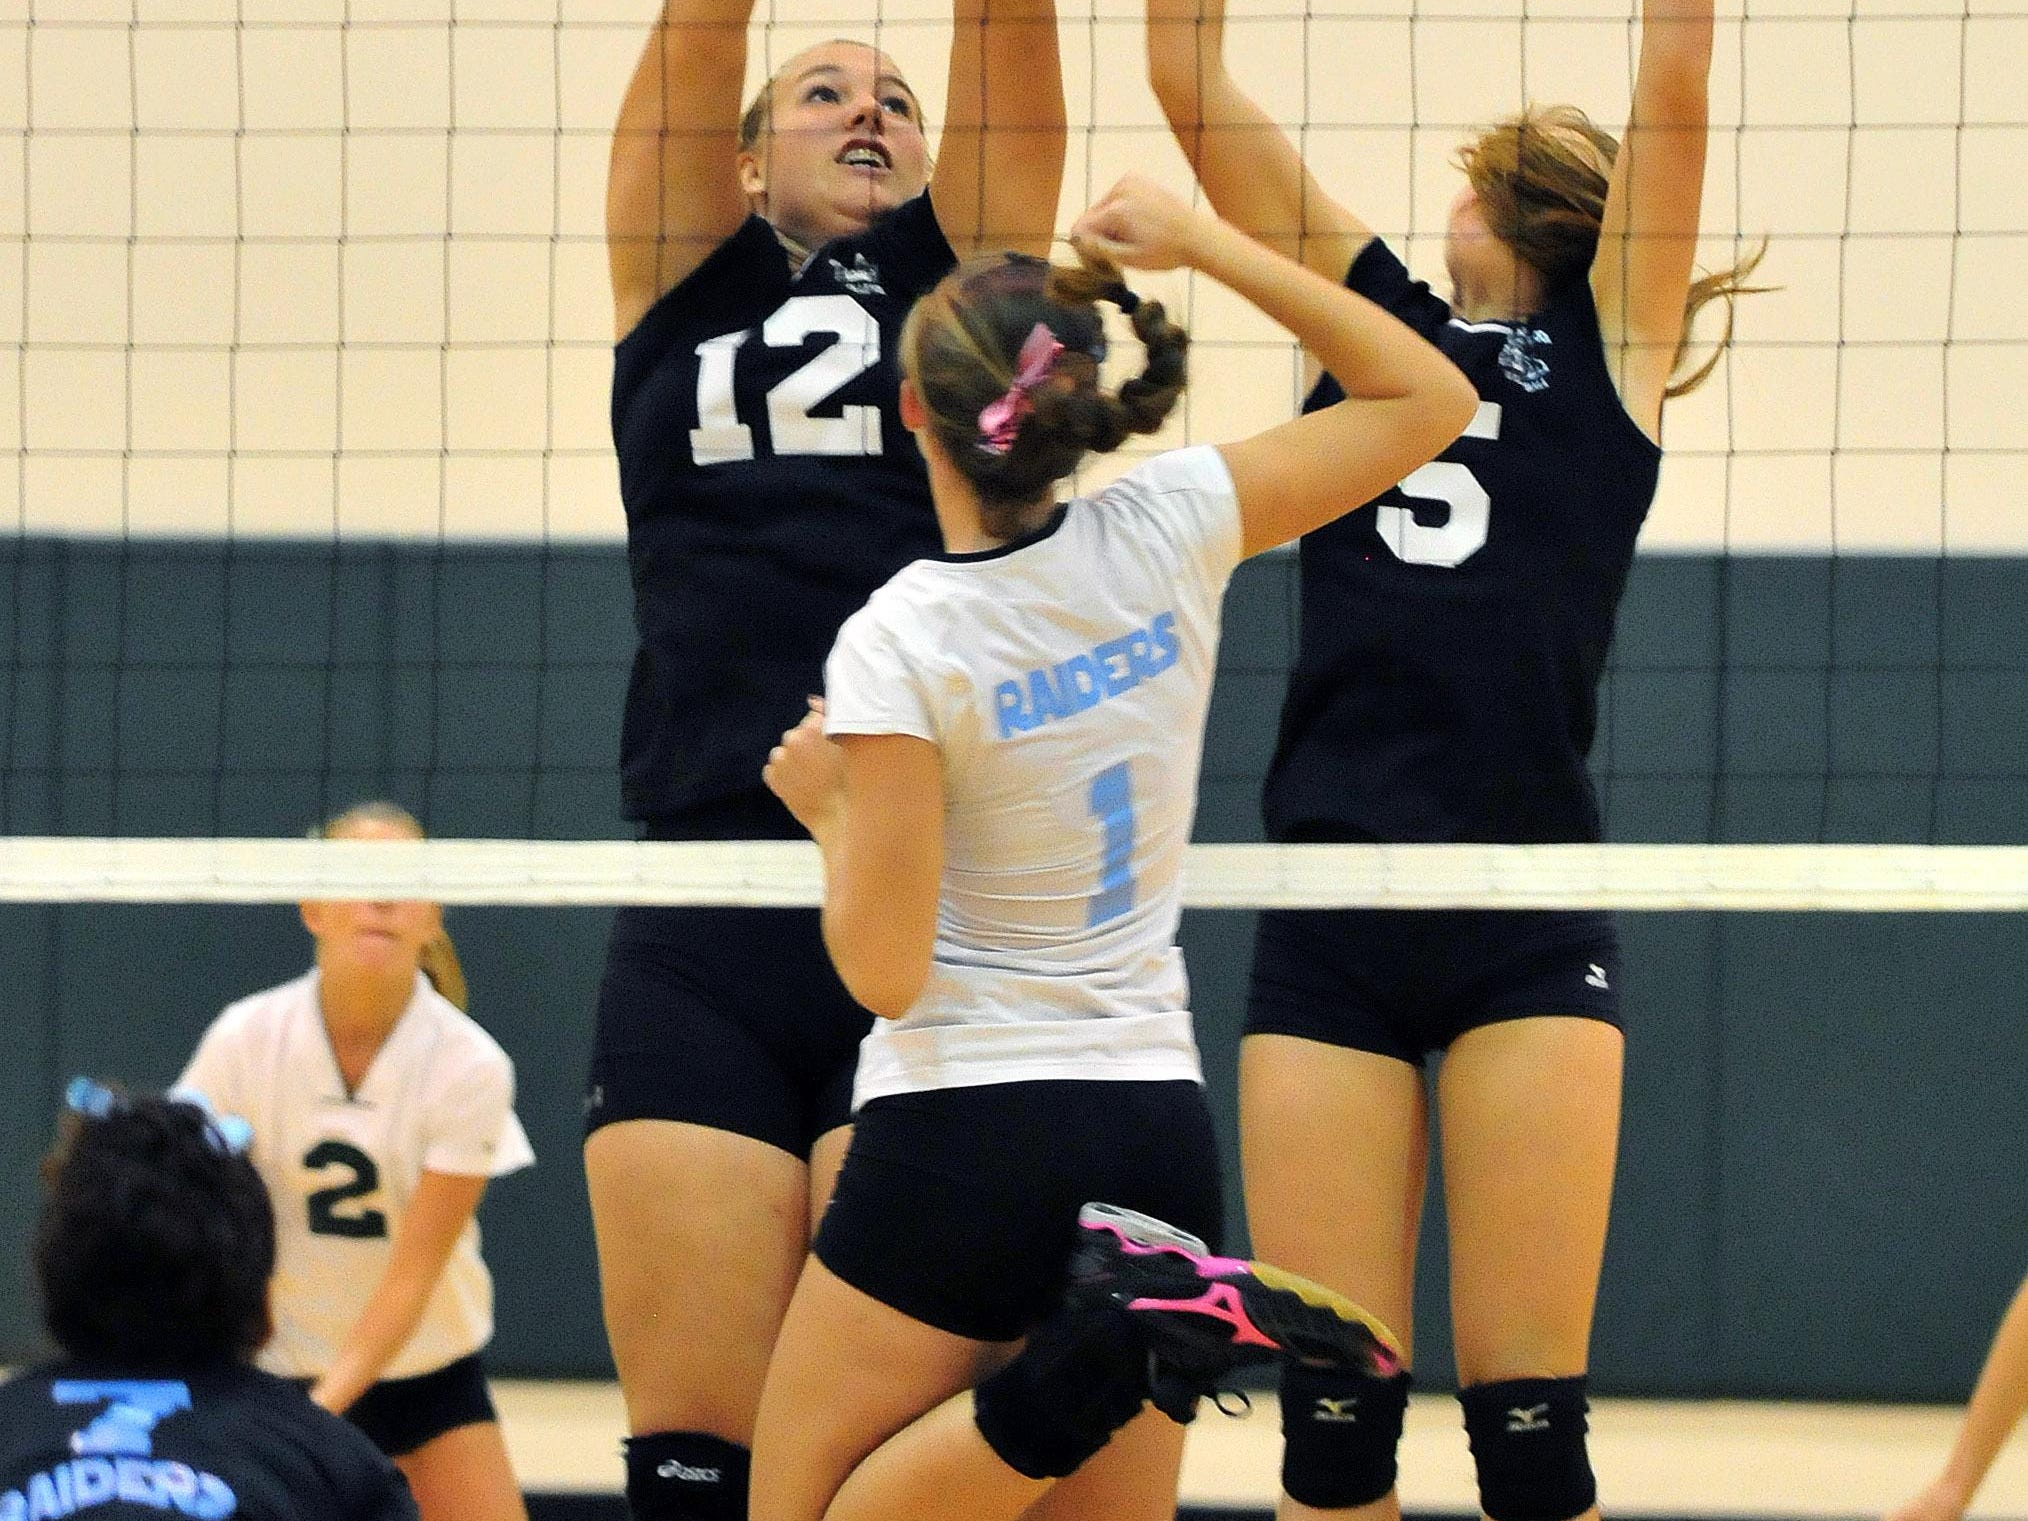 Rockledge highs #1 Alex Hollabaugh hits a shot over Mel Highs #12 Shelby Alsdorf and teammate #5Hannah Wilkins during Wednesday night match held at Melbourne High gym. CRAIG RUBADOUX FLORIDA TODAY